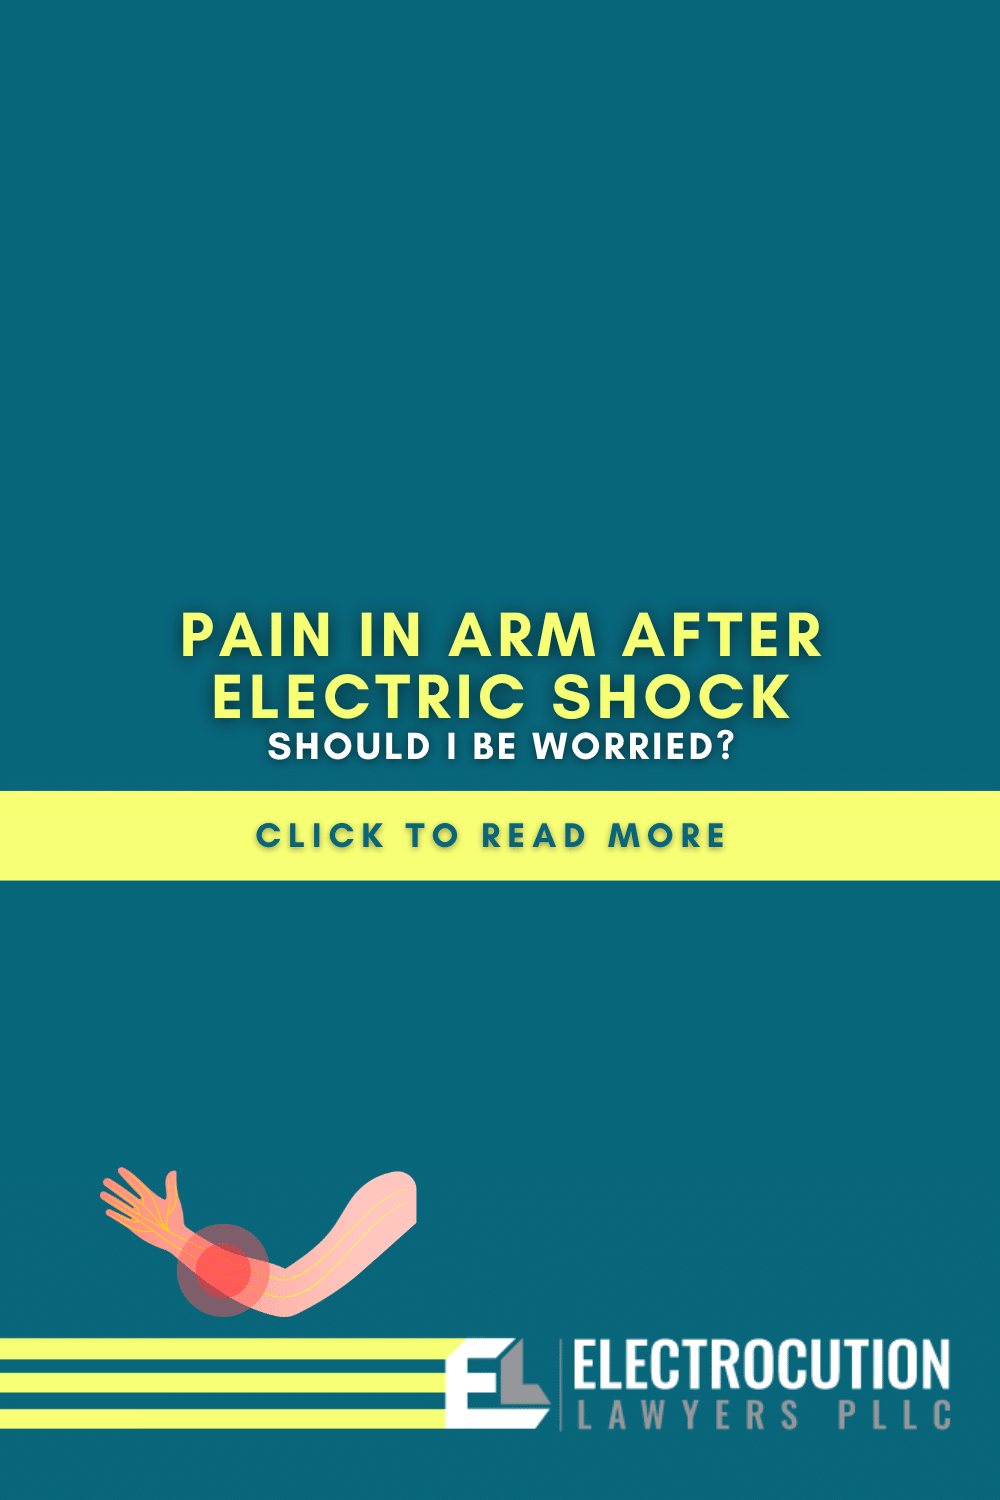 Pain In Arm After Electric Shock: Should I Be Worried?